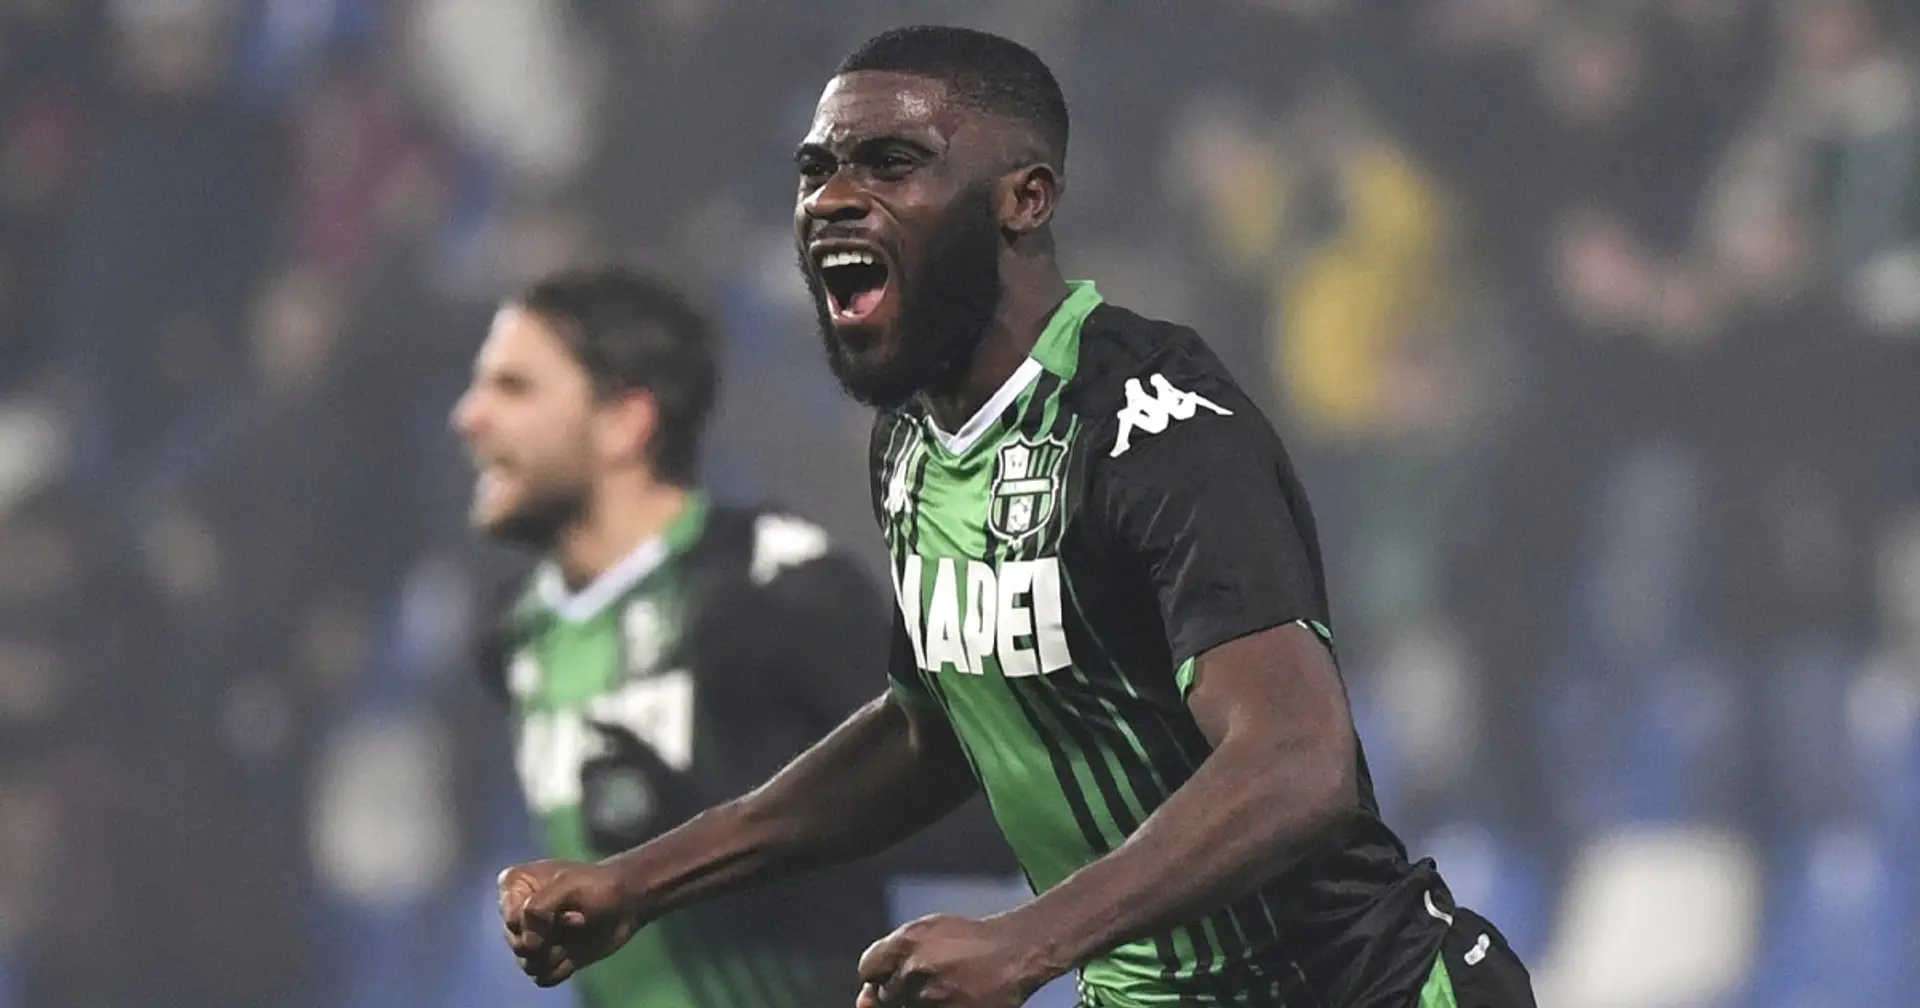 Jeremie Boga: 'I have no regrets, as I made the right decision in leaving Chelsea'